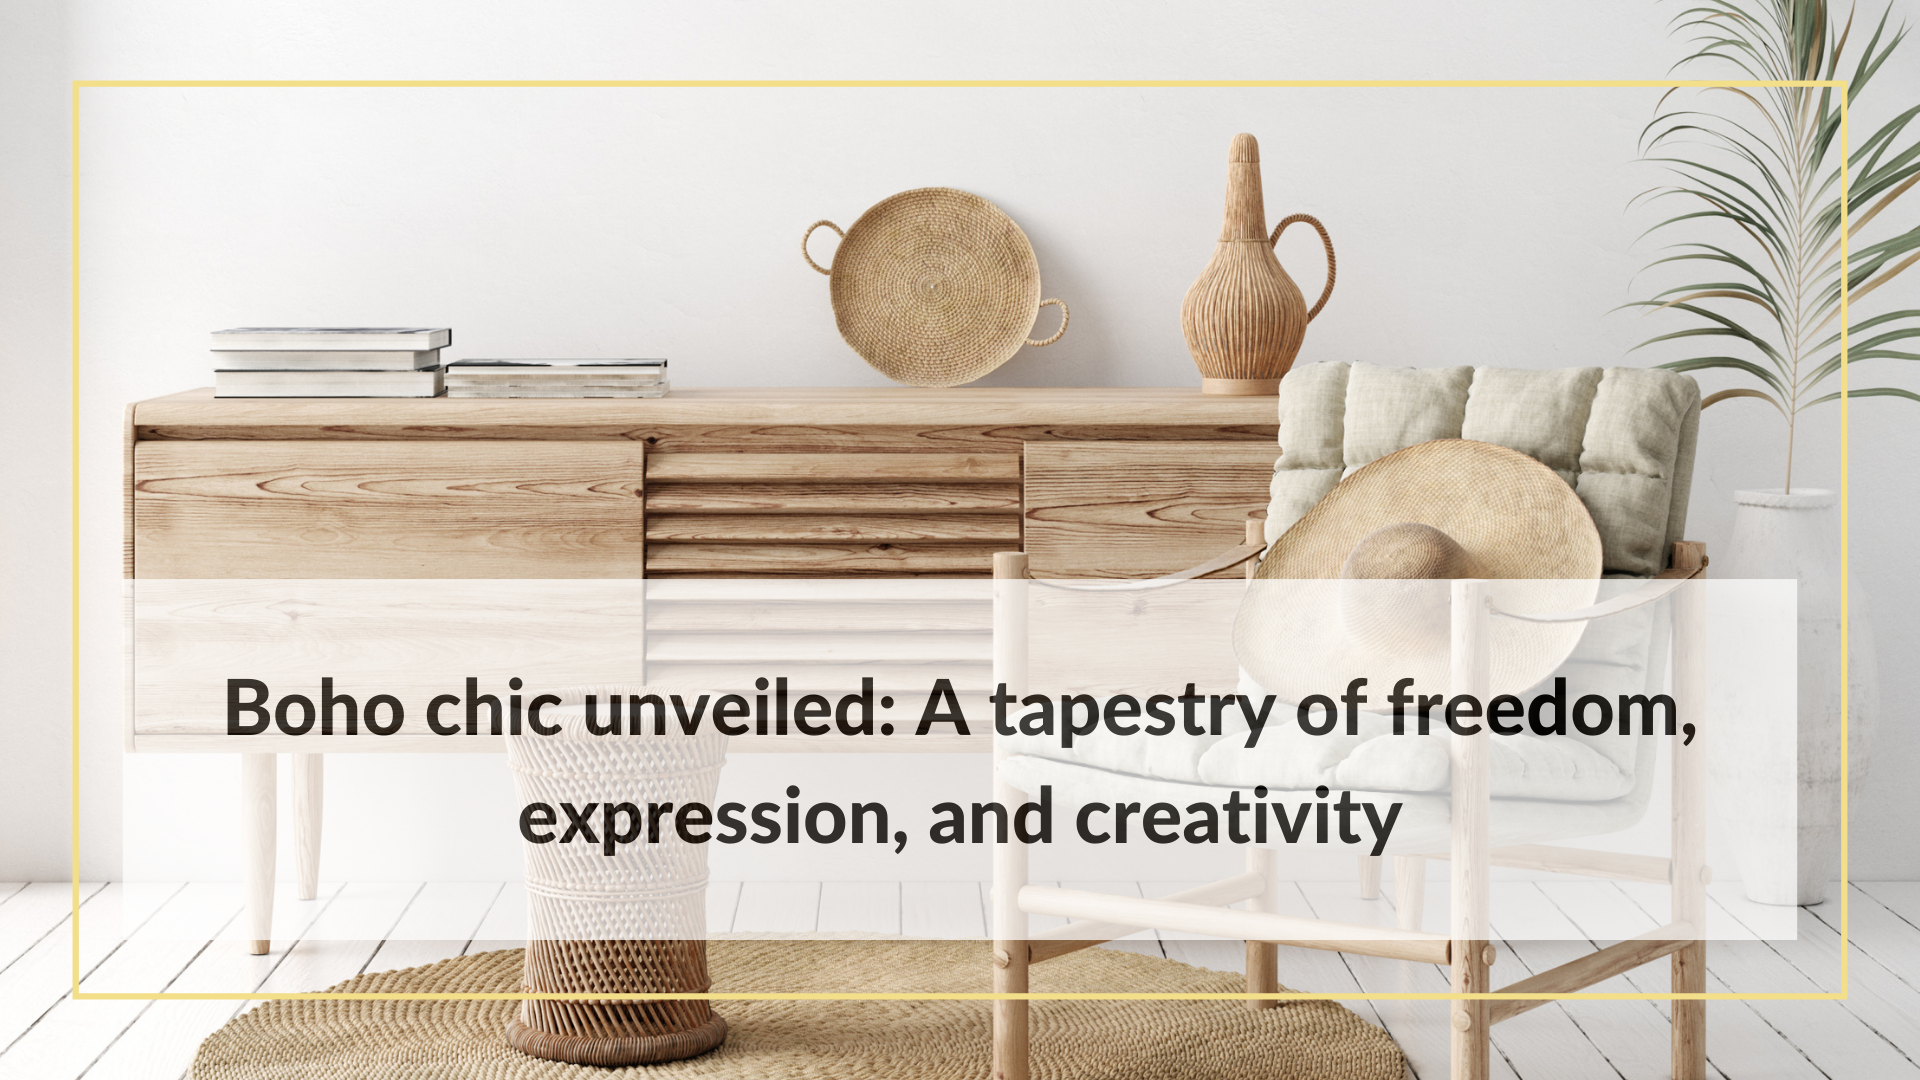 Boho chic unveiled A tapestry of freedom, expression, and creativity